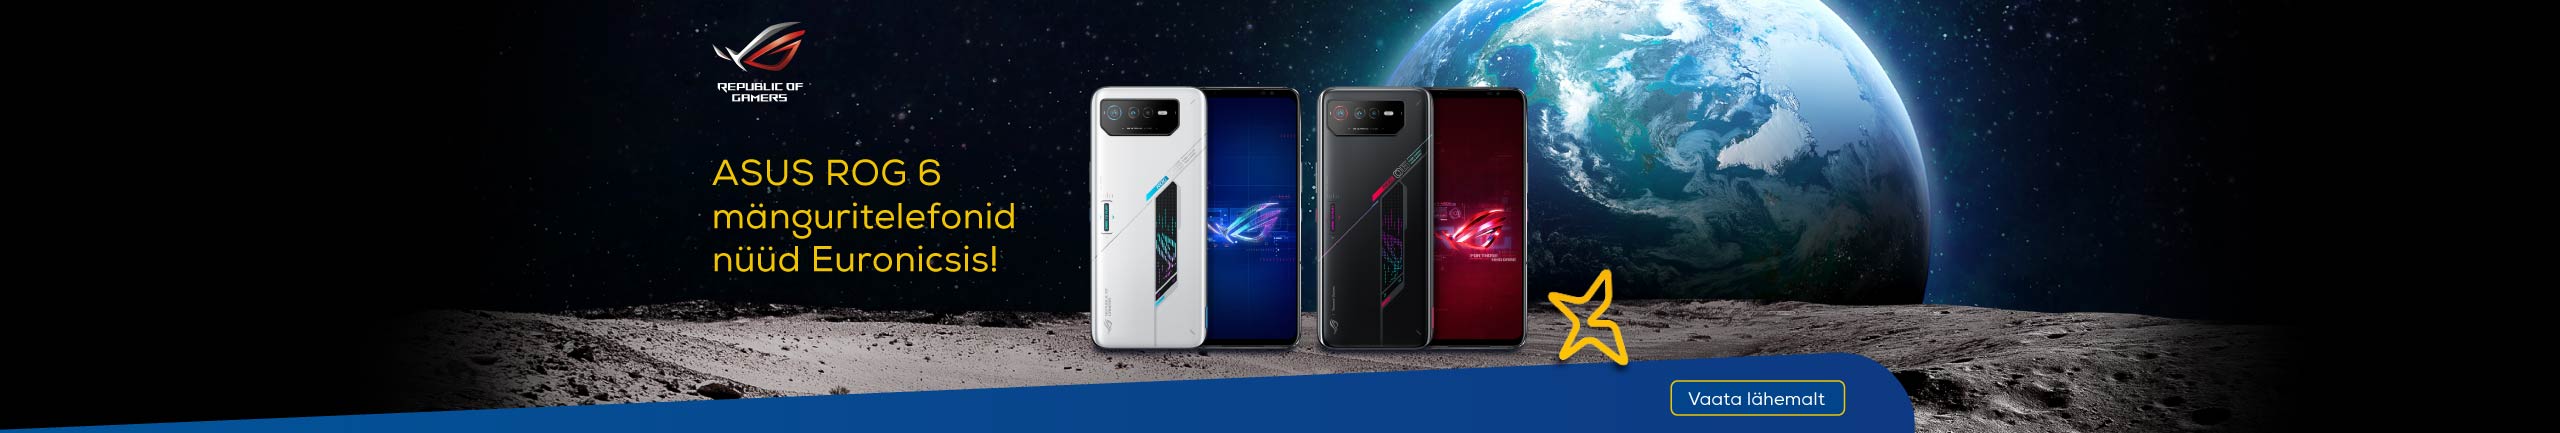 ASUS ROG 6 gamer smartphones now available!